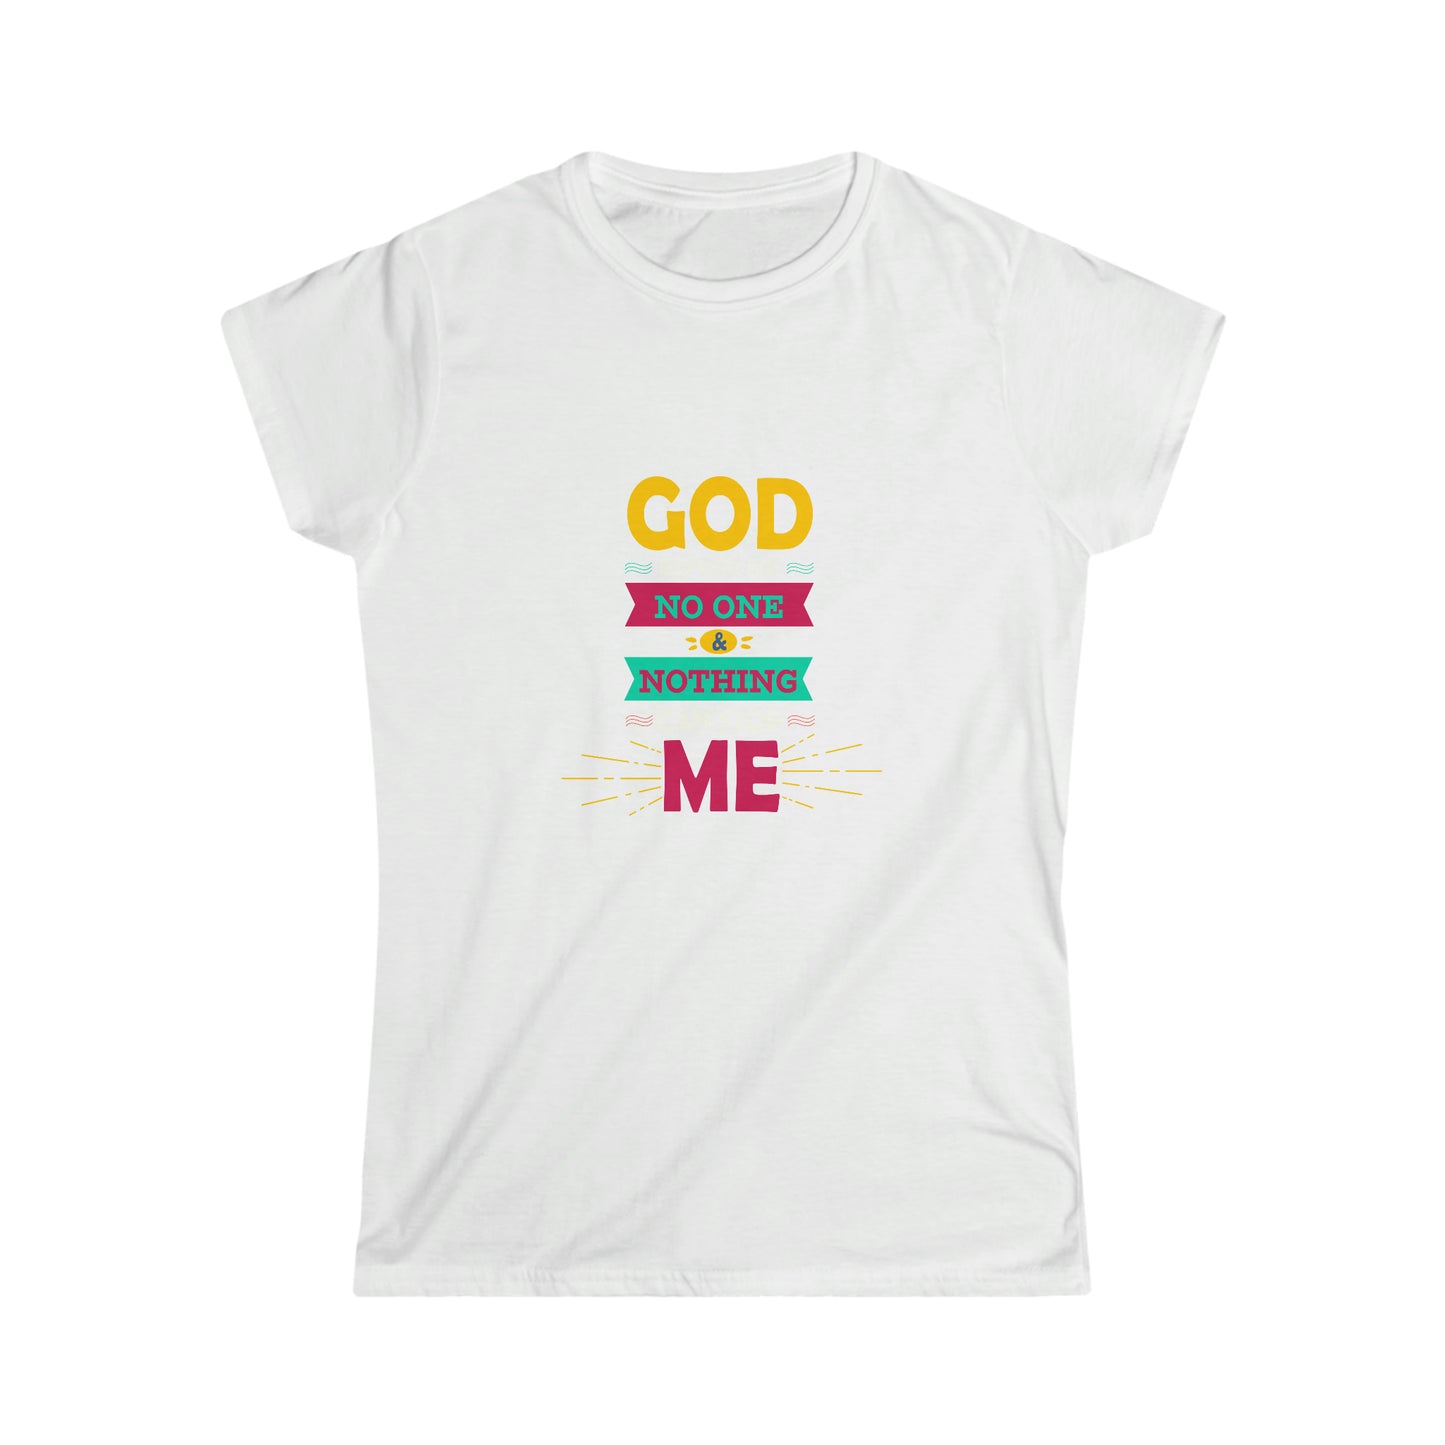 God Before Me No One & Nothing Can Stop Me Women's T-shirt